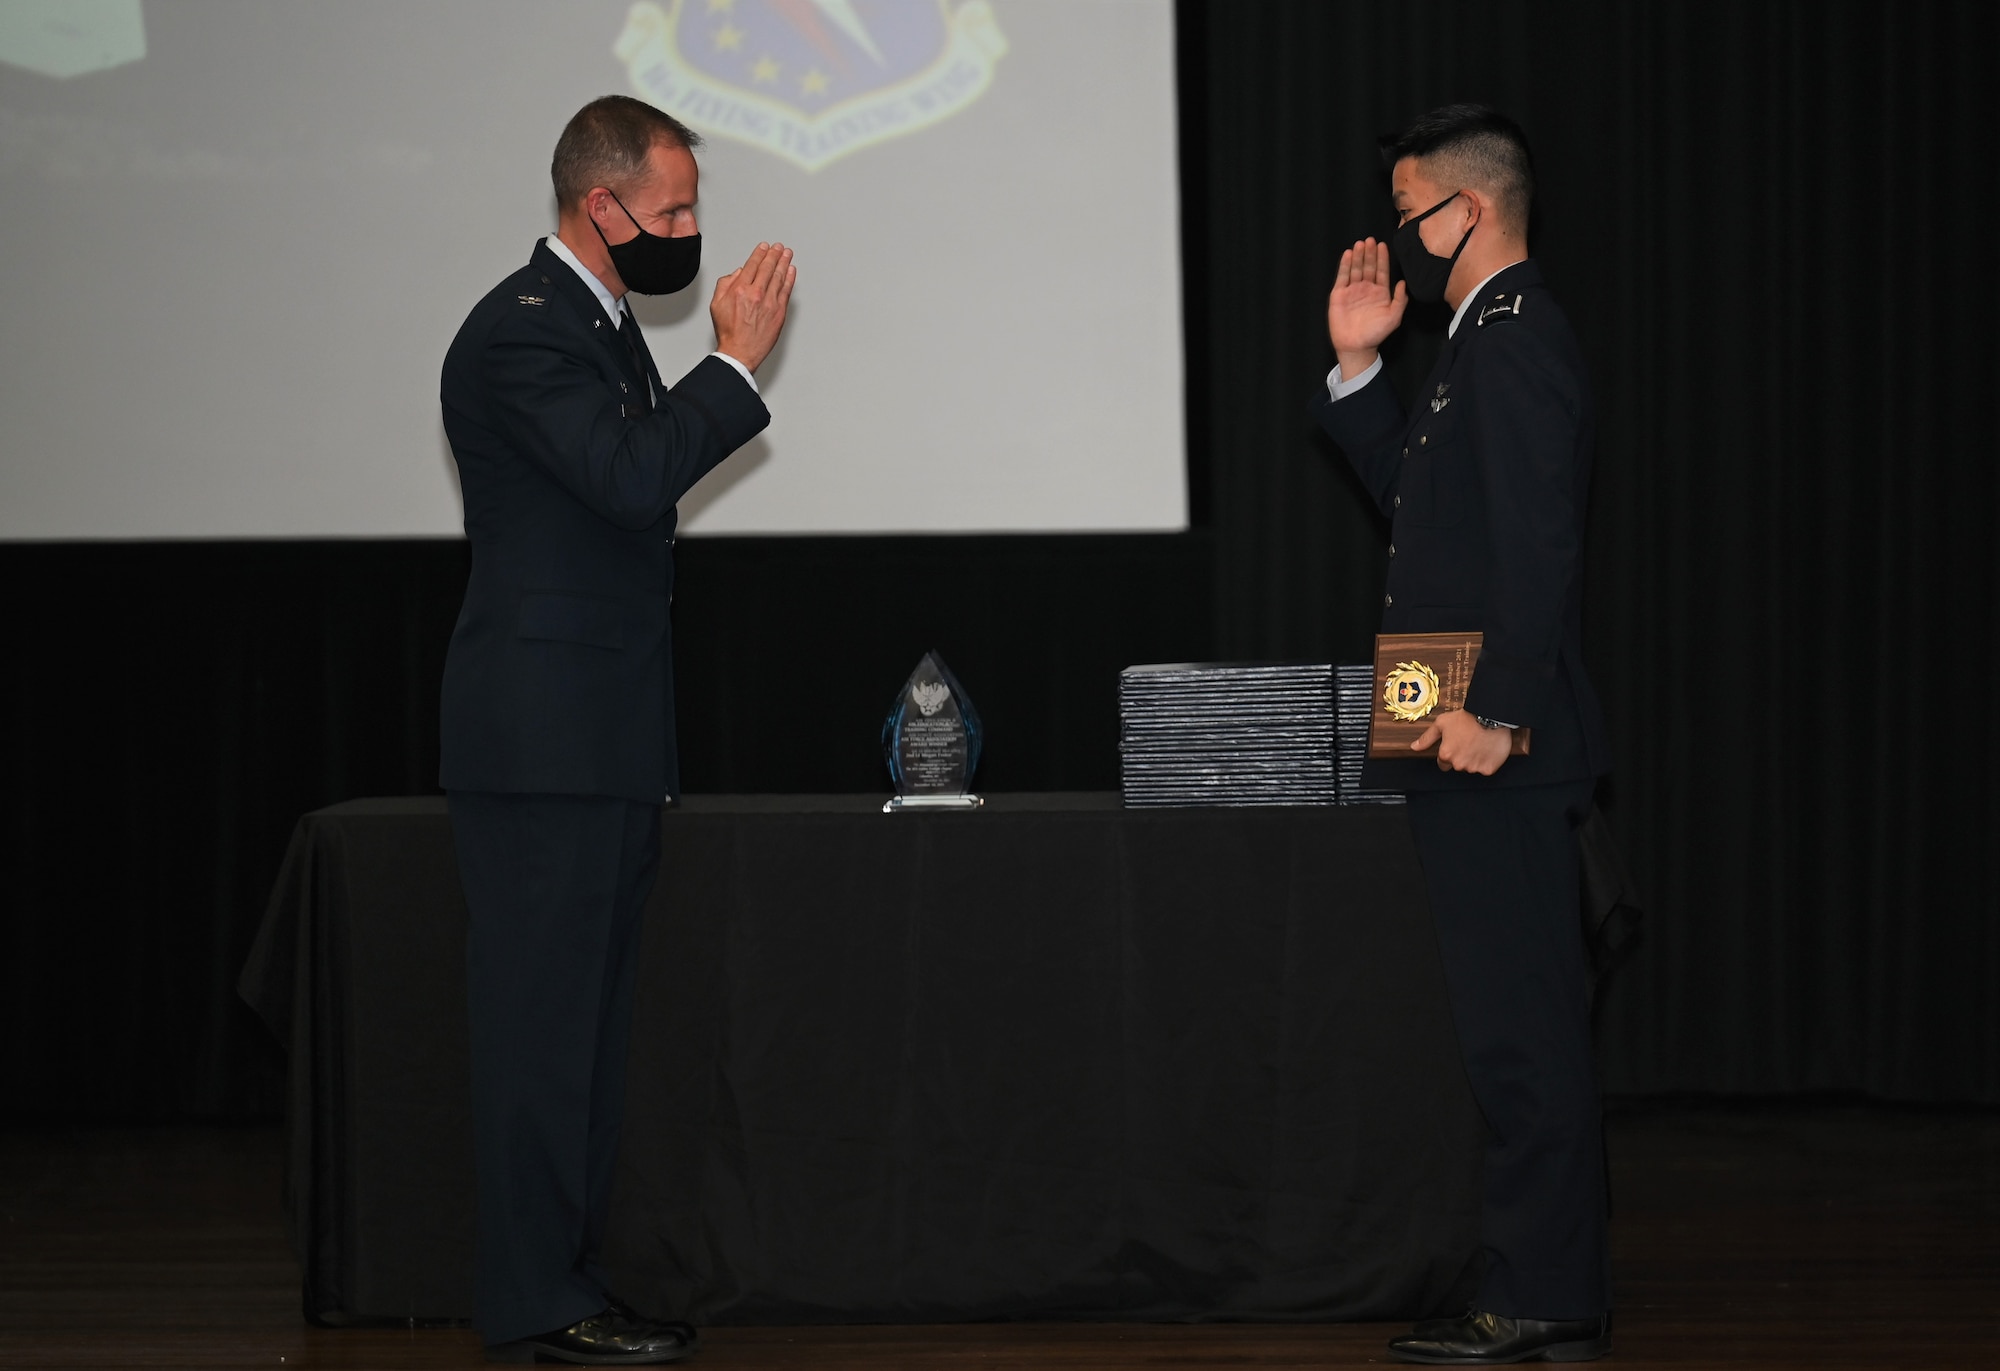 U.S. Air Force Col. Justin Spears, 14th Operations Group commander, returns a salute to Japan Air Self-Defense Force 1st Lt. Kento Katagiri, after presenting him with an International Training Award, Dec. 10, 2021, on Columbus Air Force Base, Miss. Specialized Undergraduate Pilot Training class 22-03 graduated pilots from Japan, Saudi Arabia and Republic of Turkey. (U.S. Air Force photo by Airman 1st Class Jessica Haynie)